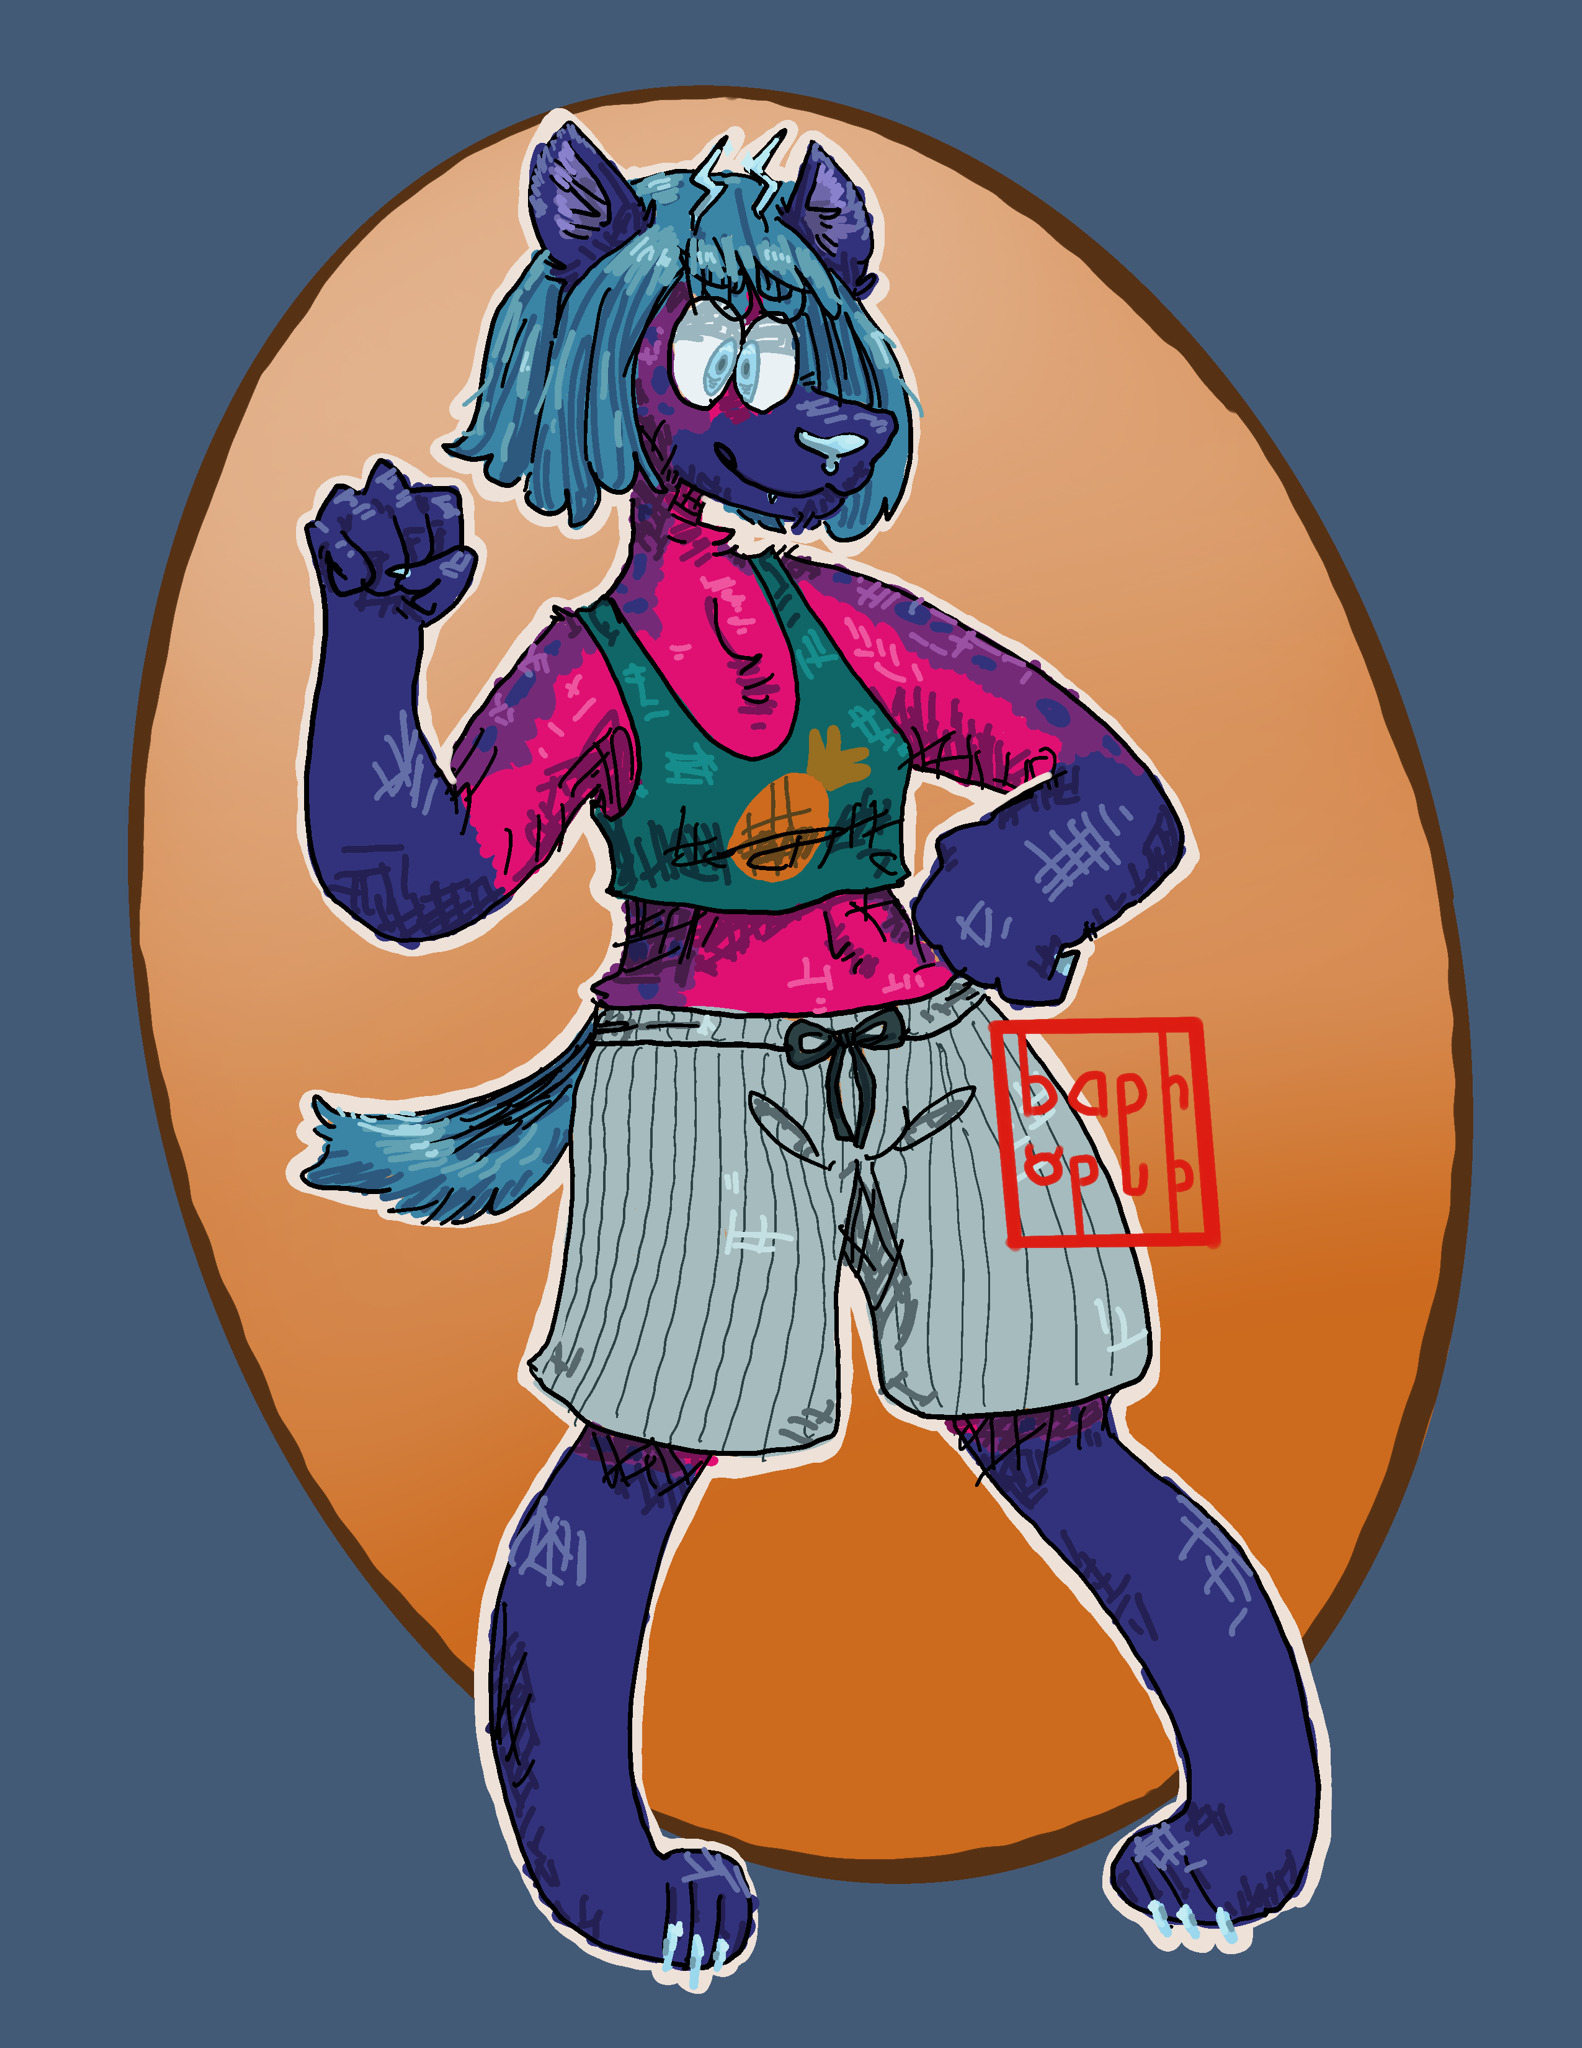 a purple anthropomorphic hyena strikes an energetic pose. her crop top has a pineapple on it.